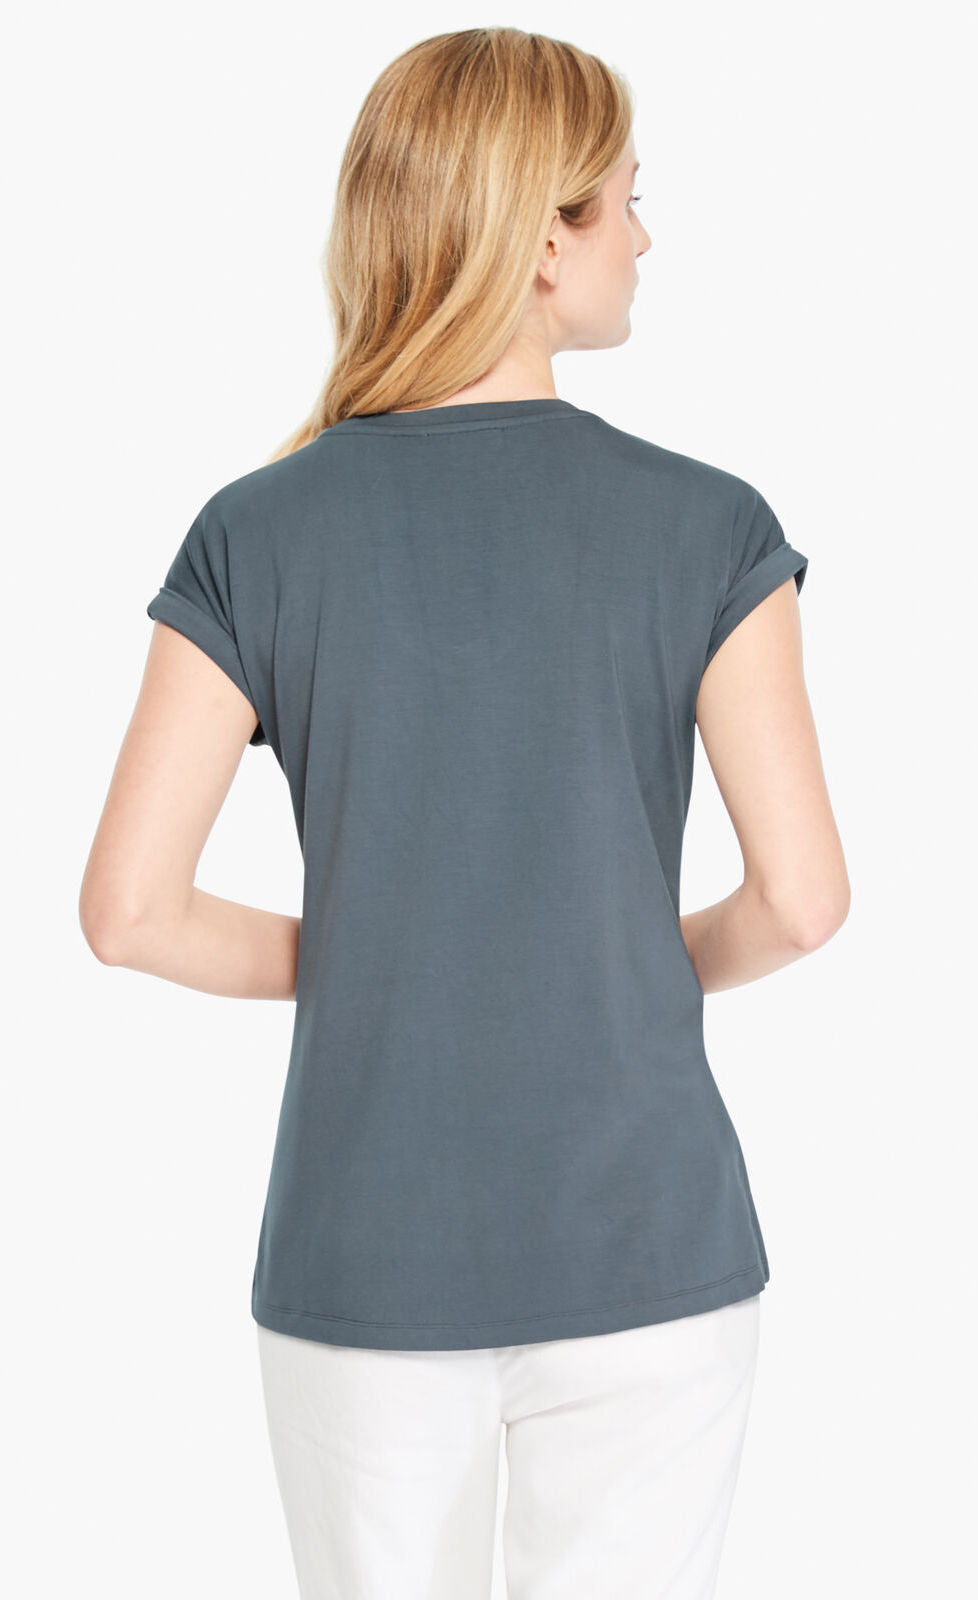 Back top half view of a woman wearing the Nic+Zoe Eaze V Tee. This tee is slate and has short sleeves.